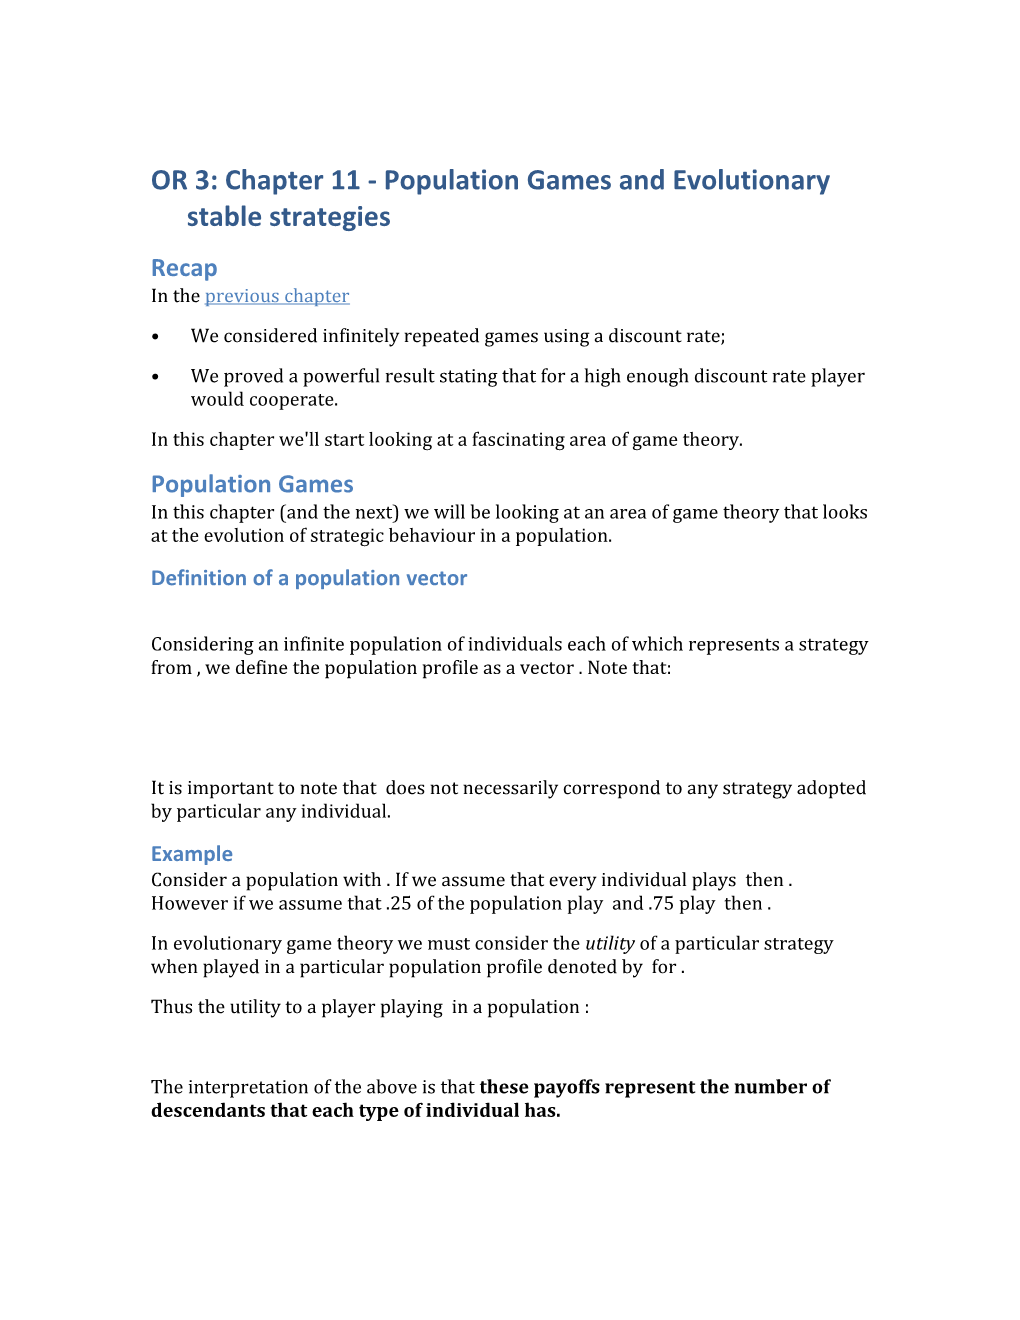 OR 3: Chapter 11 - Population Games and Evolutionary Stable Strategies